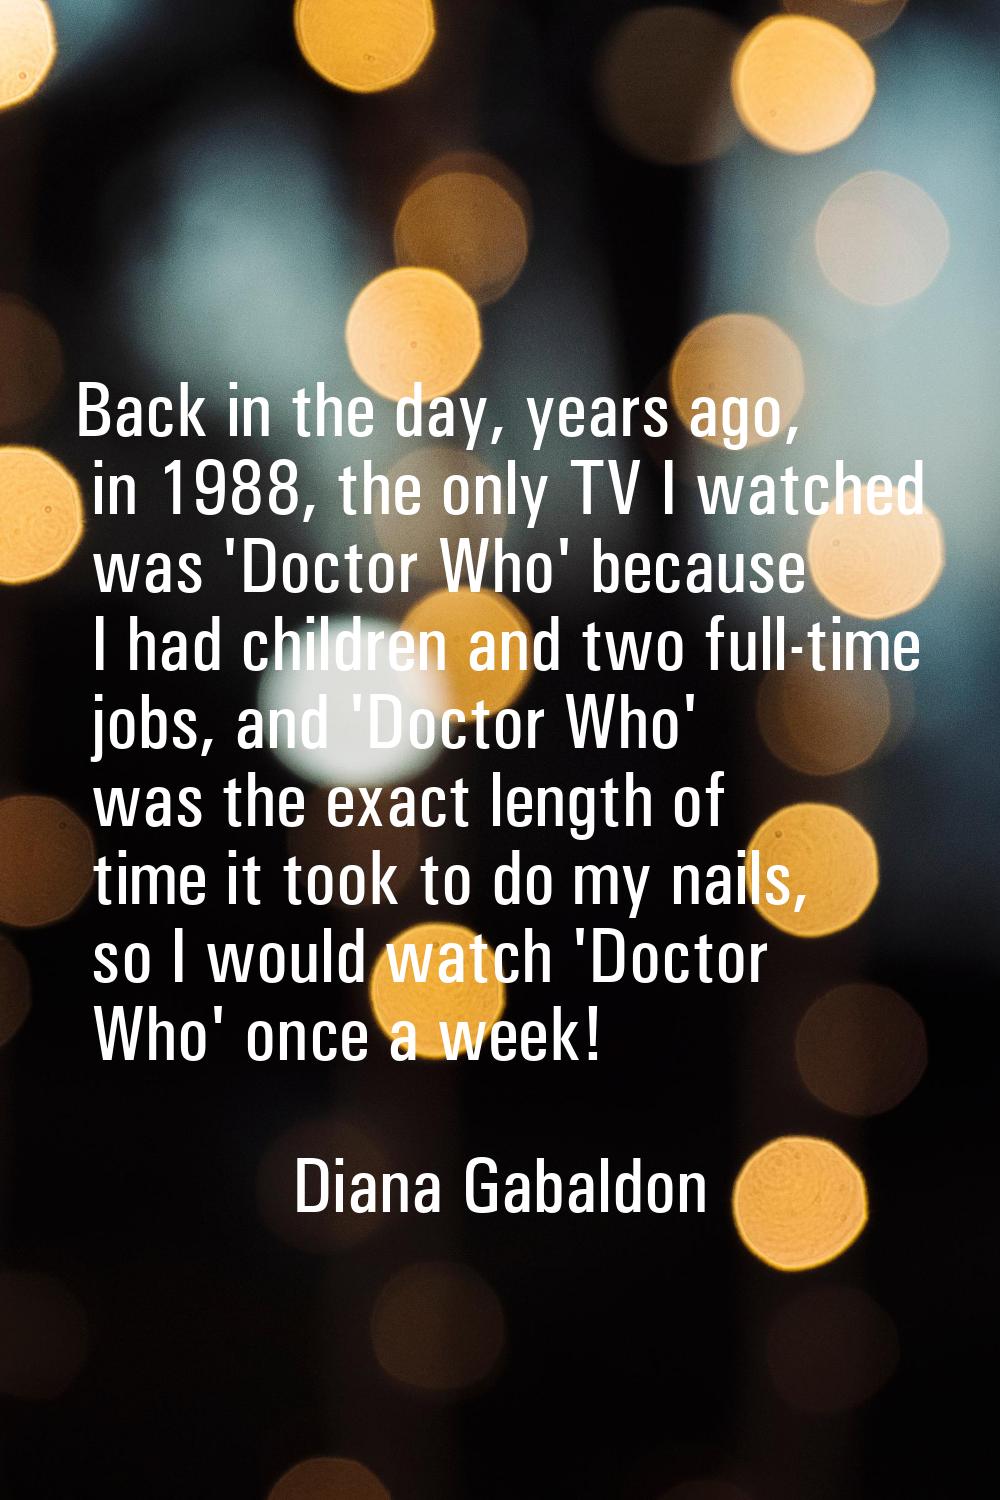 Back in the day, years ago, in 1988, the only TV I watched was 'Doctor Who' because I had children 